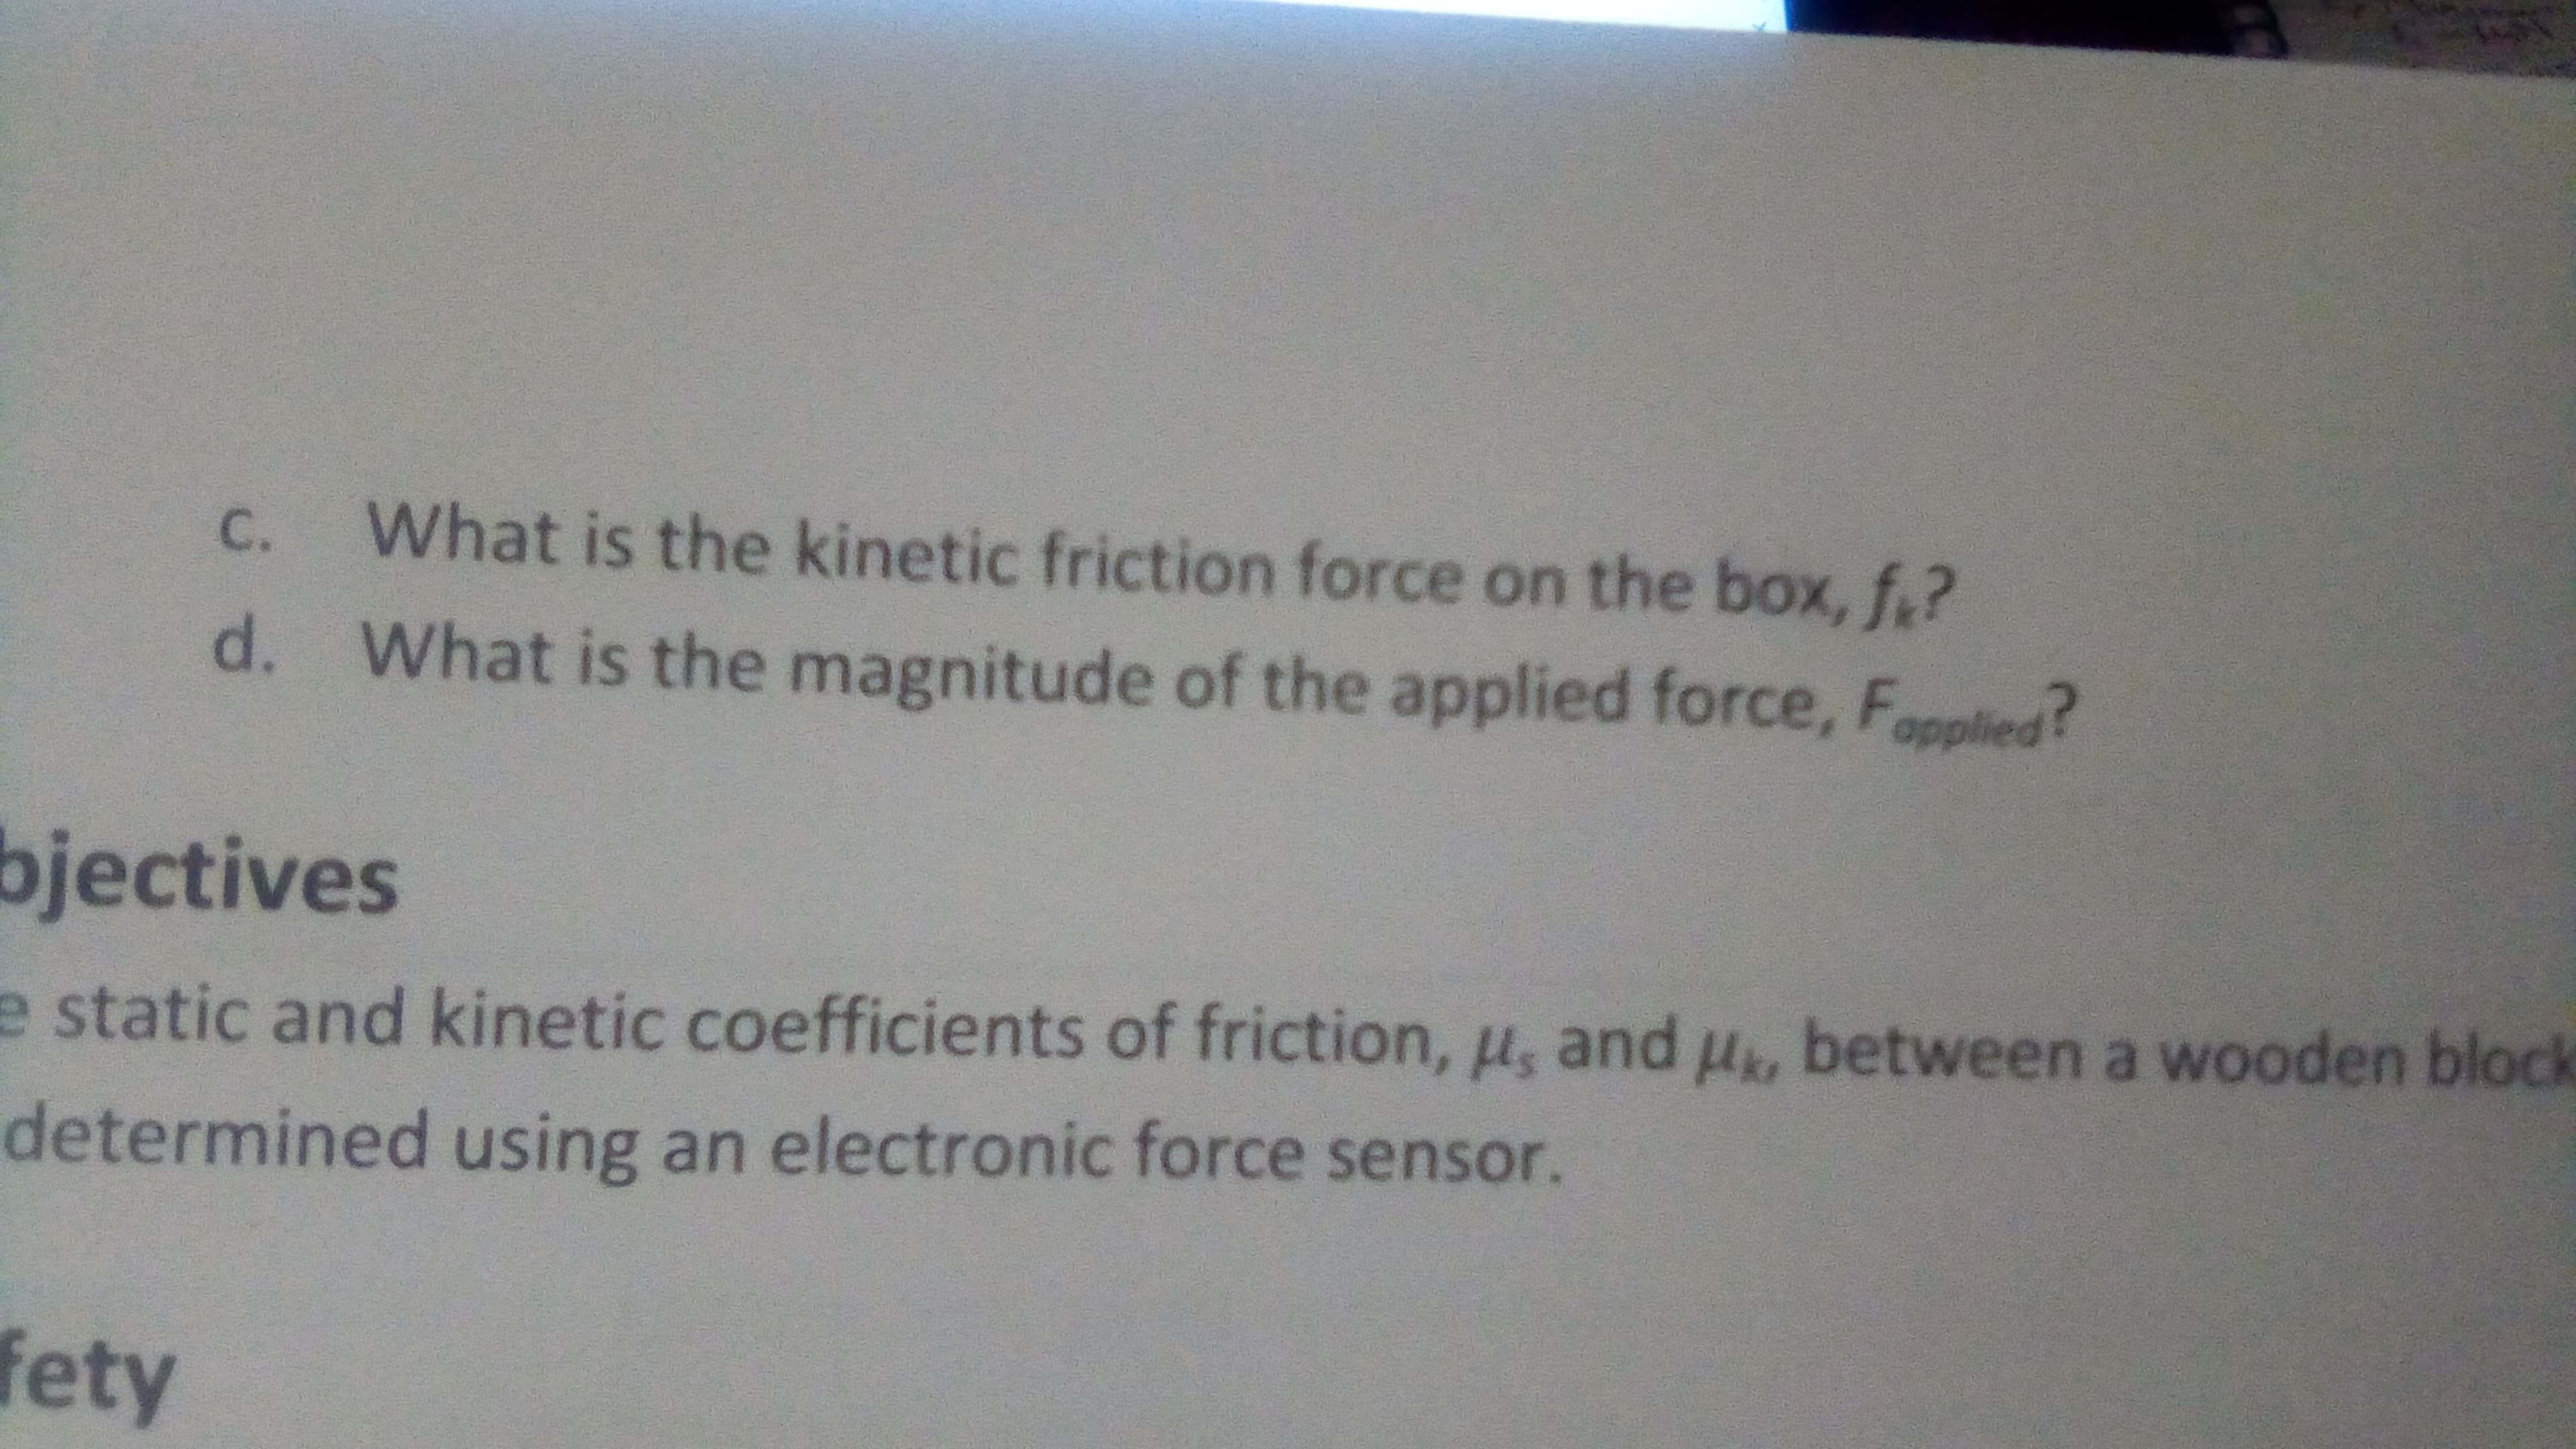 C.
What is the kinetic friction force on the box, f.?
d. What is the magnitude of the applied force, Fpplied?
bjectives
e static and kinetic coefficients of friction, µ, and u, between a wooden block
determined using an electronic force sensor.
fety
